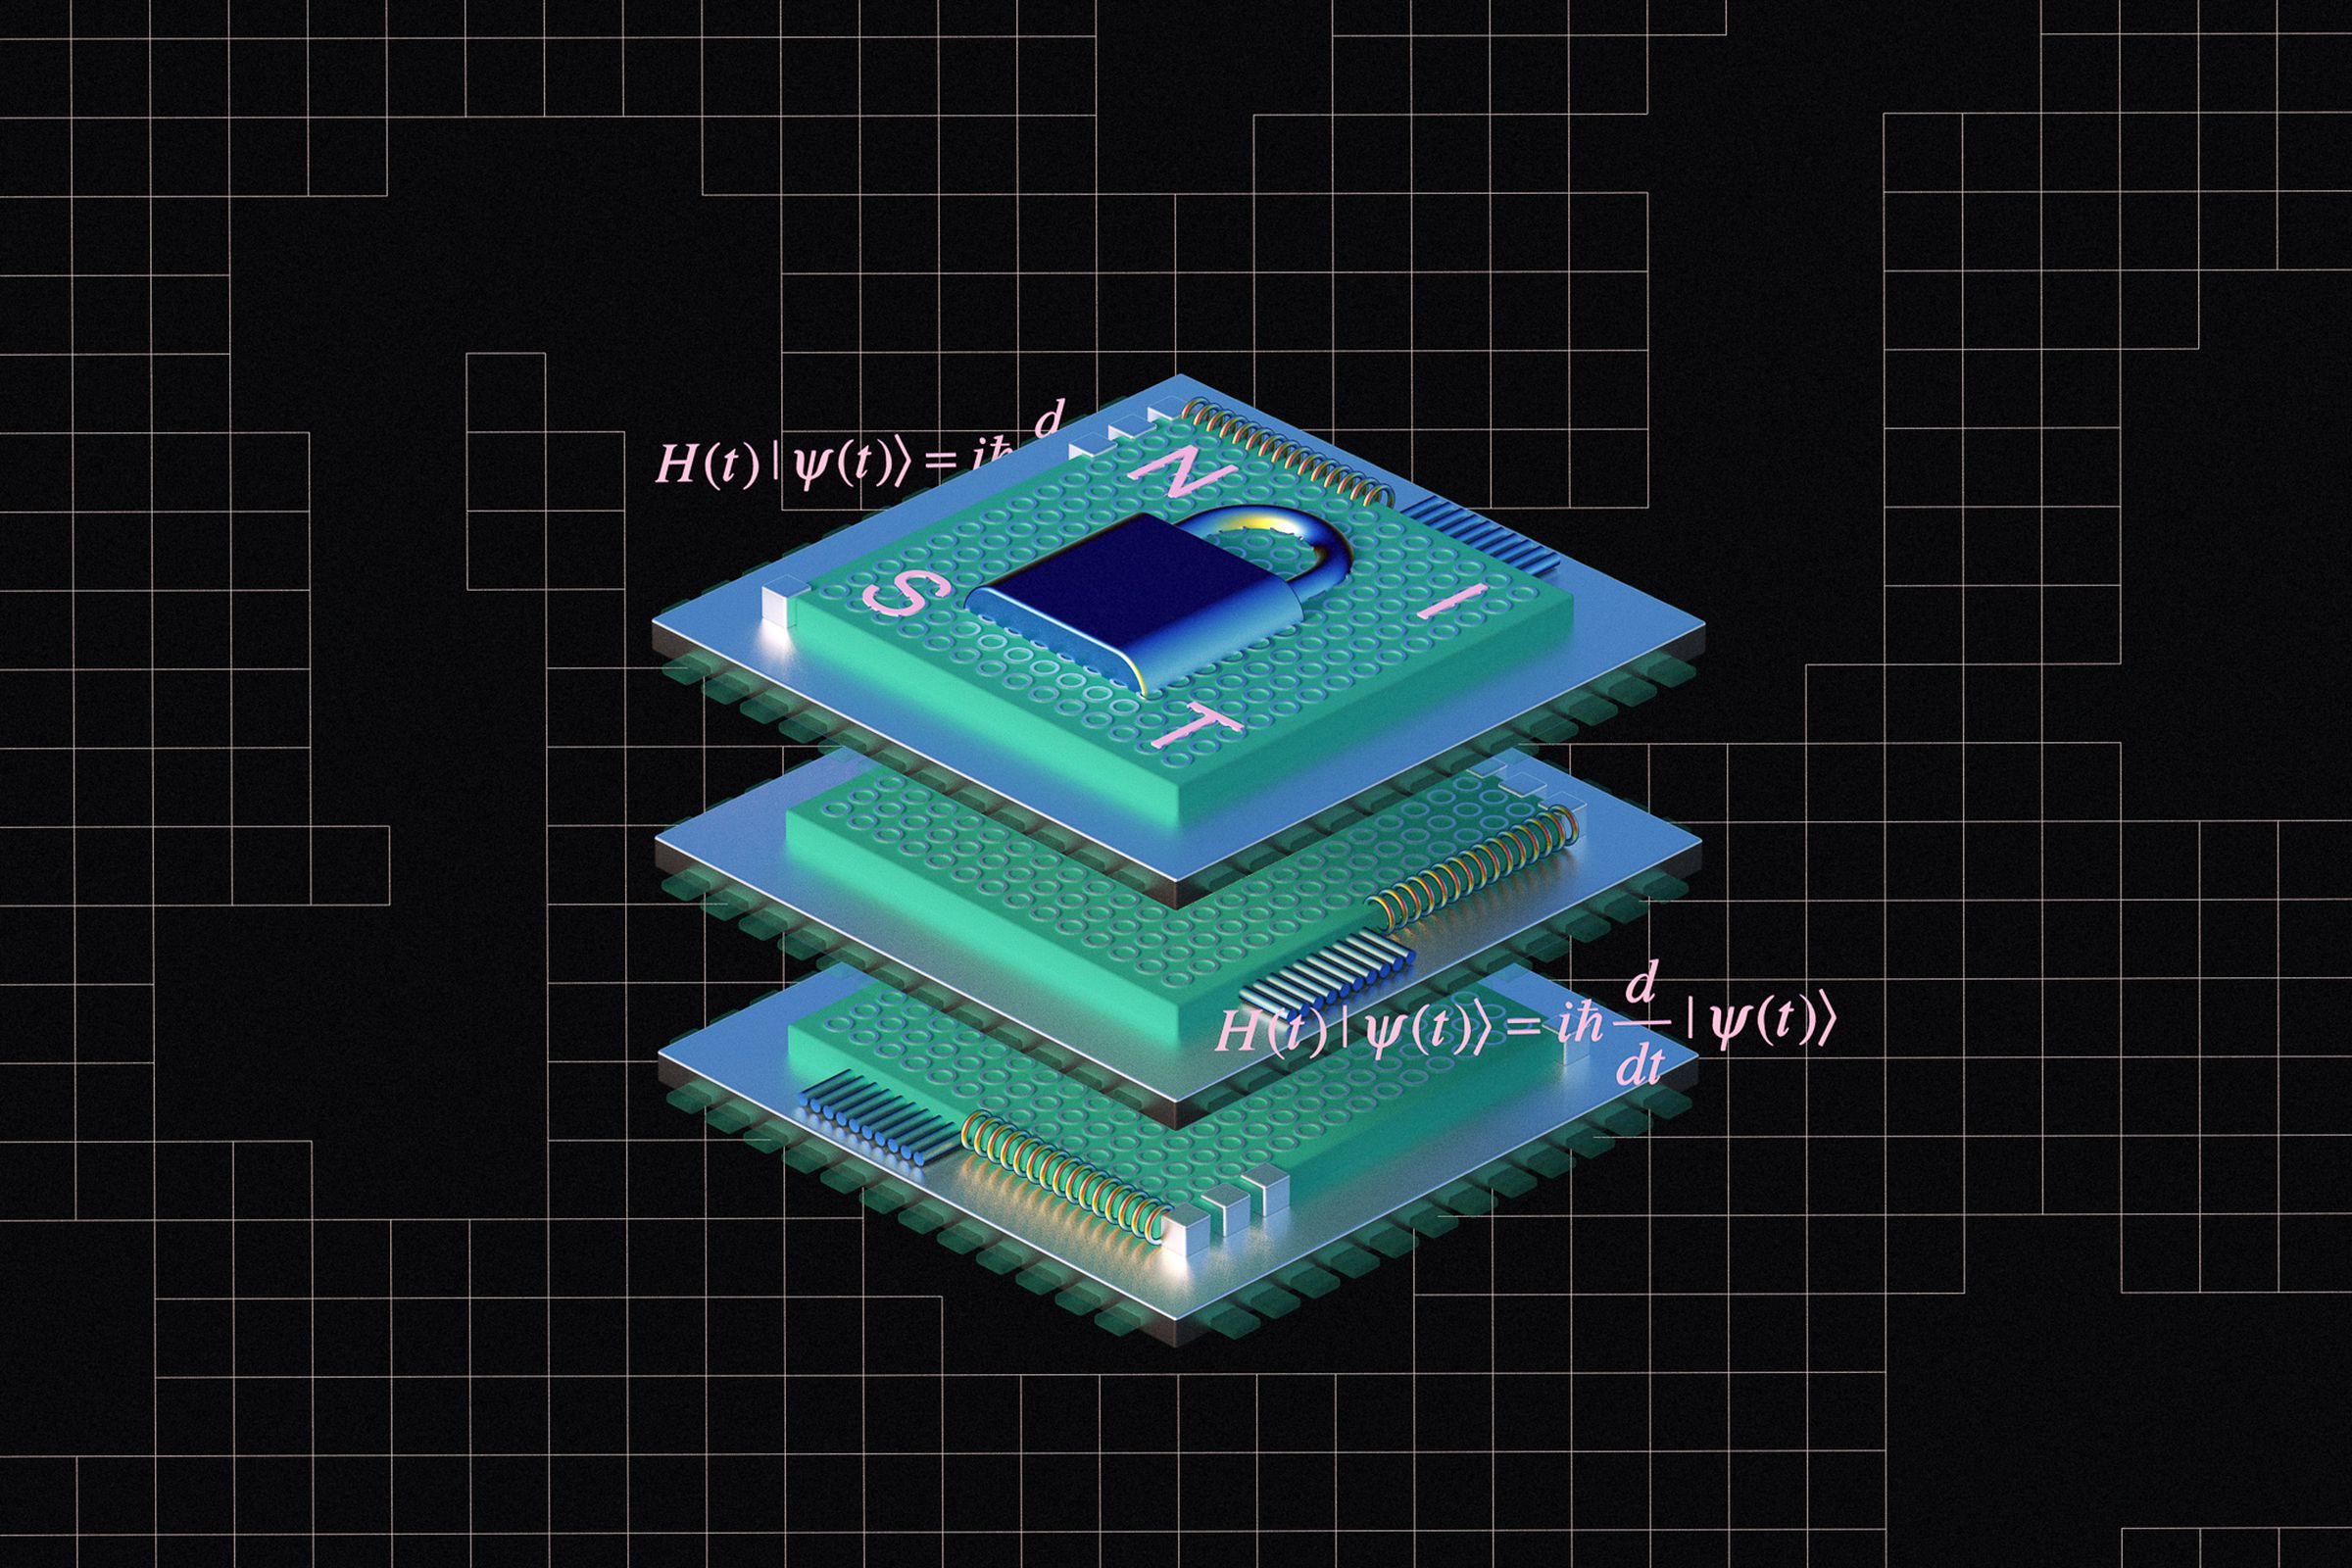 An illustration of three computer chips stacked with the letters NIST and a lock imprinted on them.